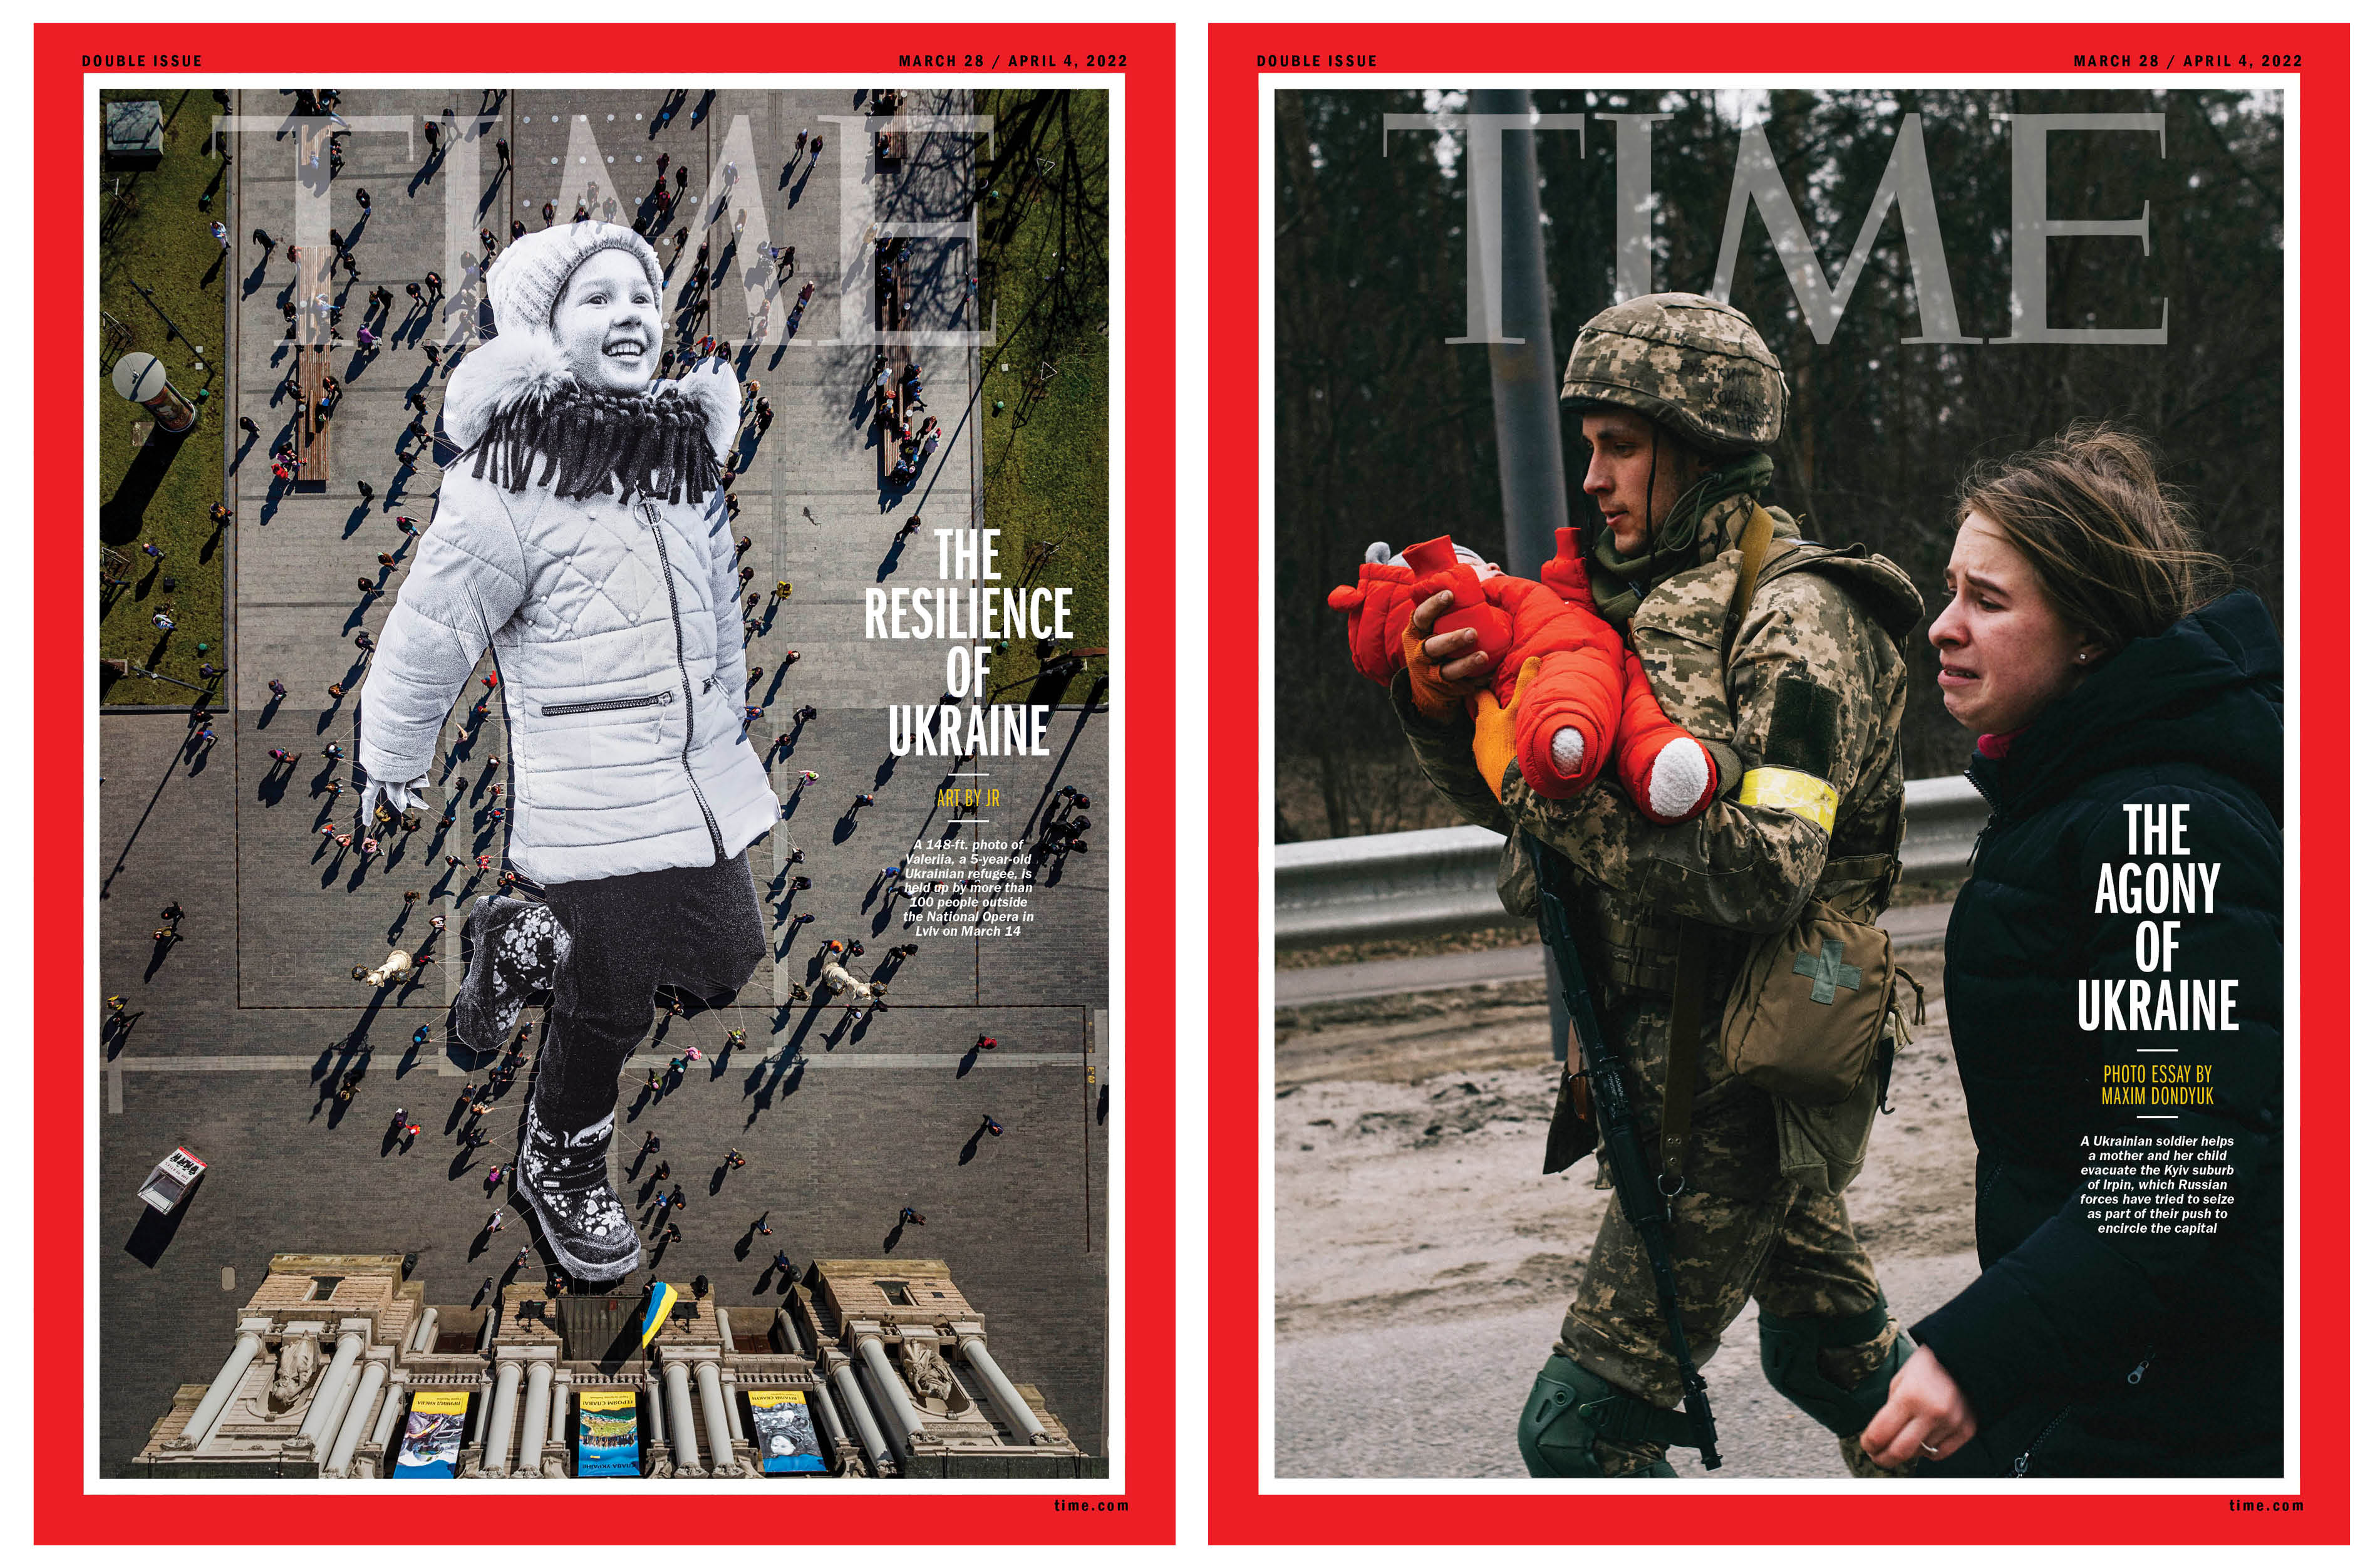 The Resilience and Agony of Ukraine Time Magazine covers 220328